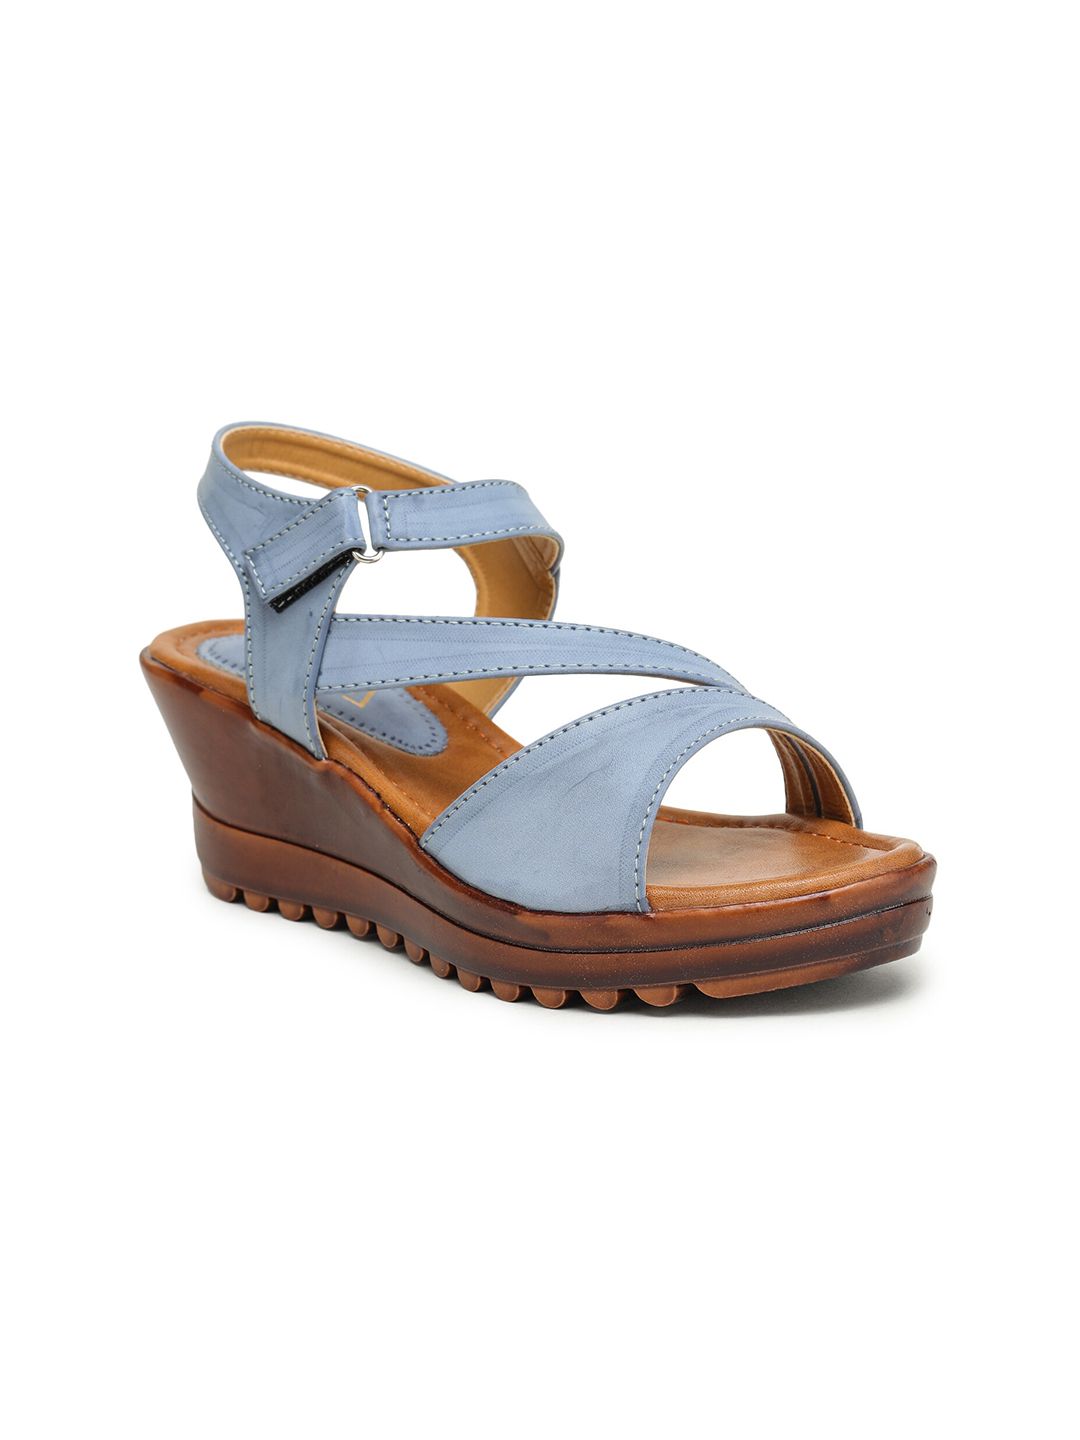 EVERLY Blue & Brown Leather Wedge Sandals Price in India